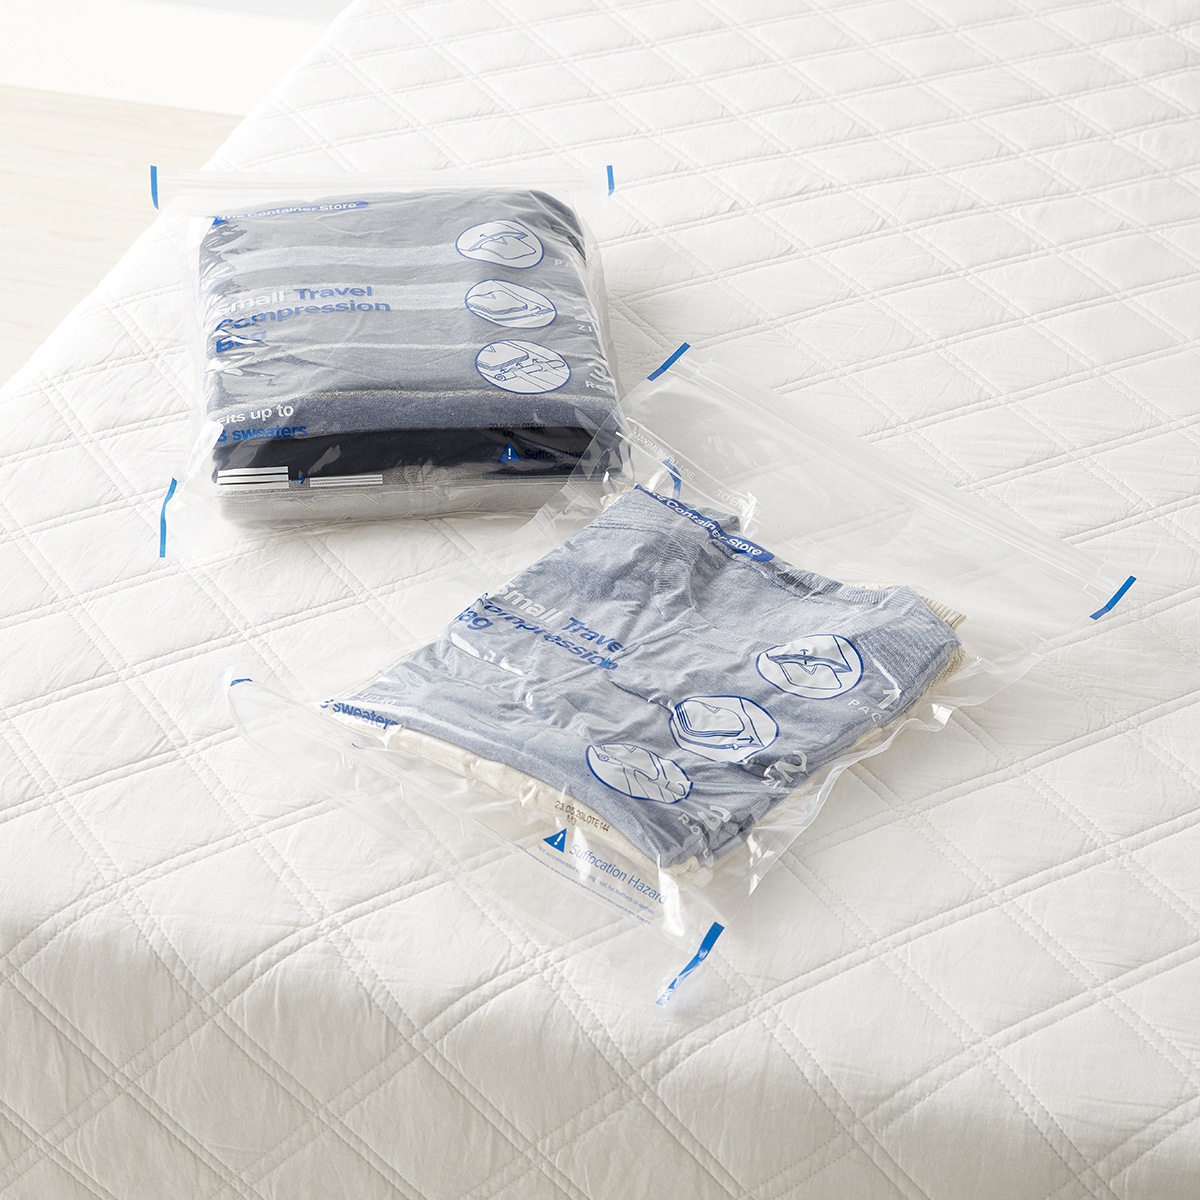 https://www.containerstore.com/catalogimages/393851/10082048-small-travel-vacuum-bag-PVL.jpg